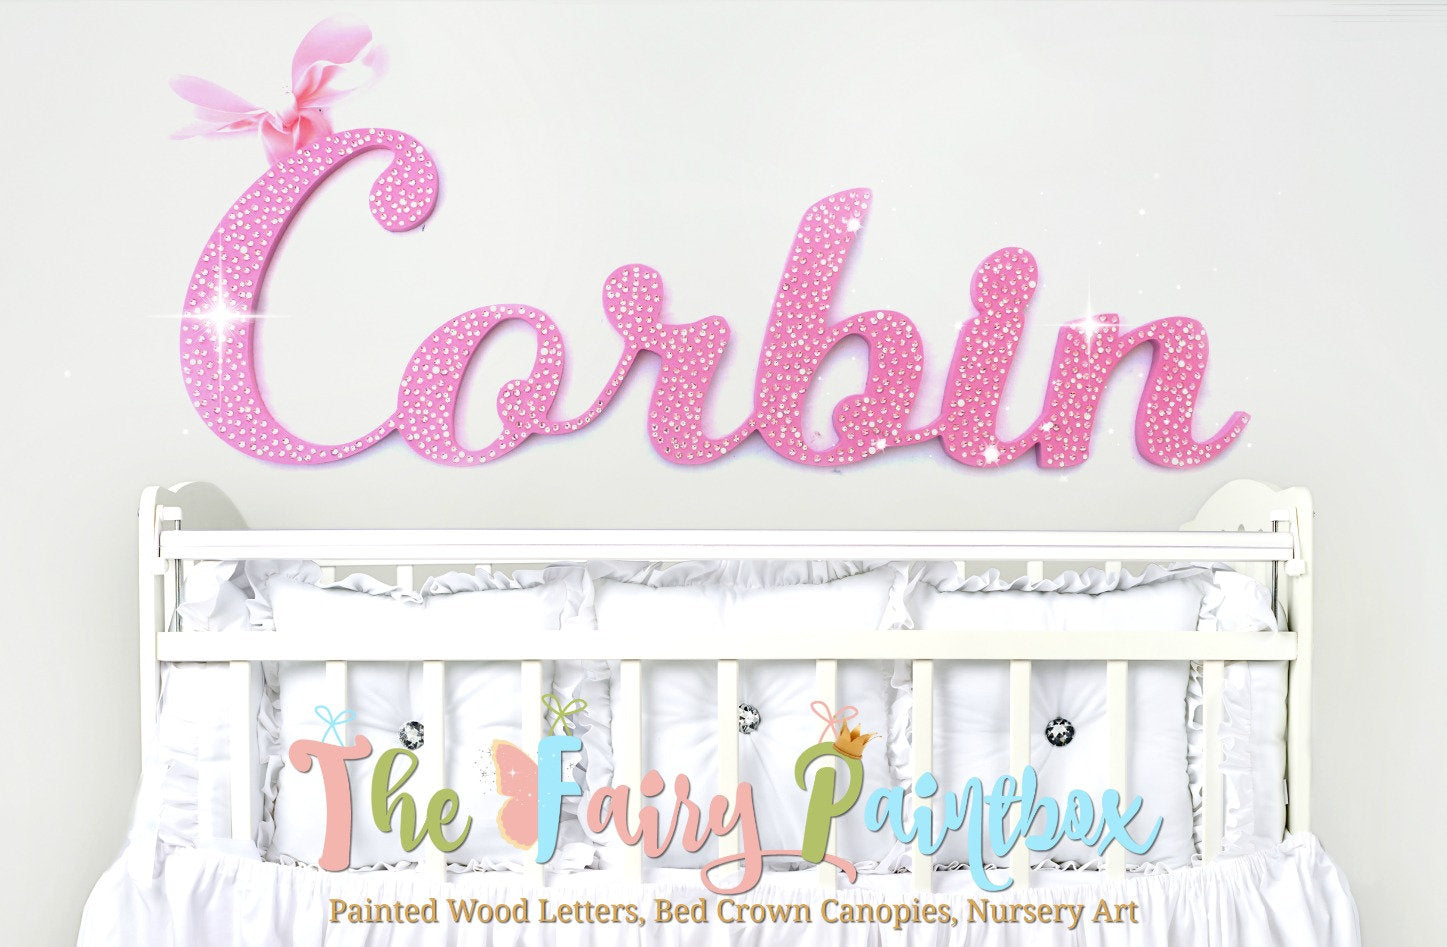 Bedazzled Crystal Nursery Wall Painted Letters - Swarovski Baby